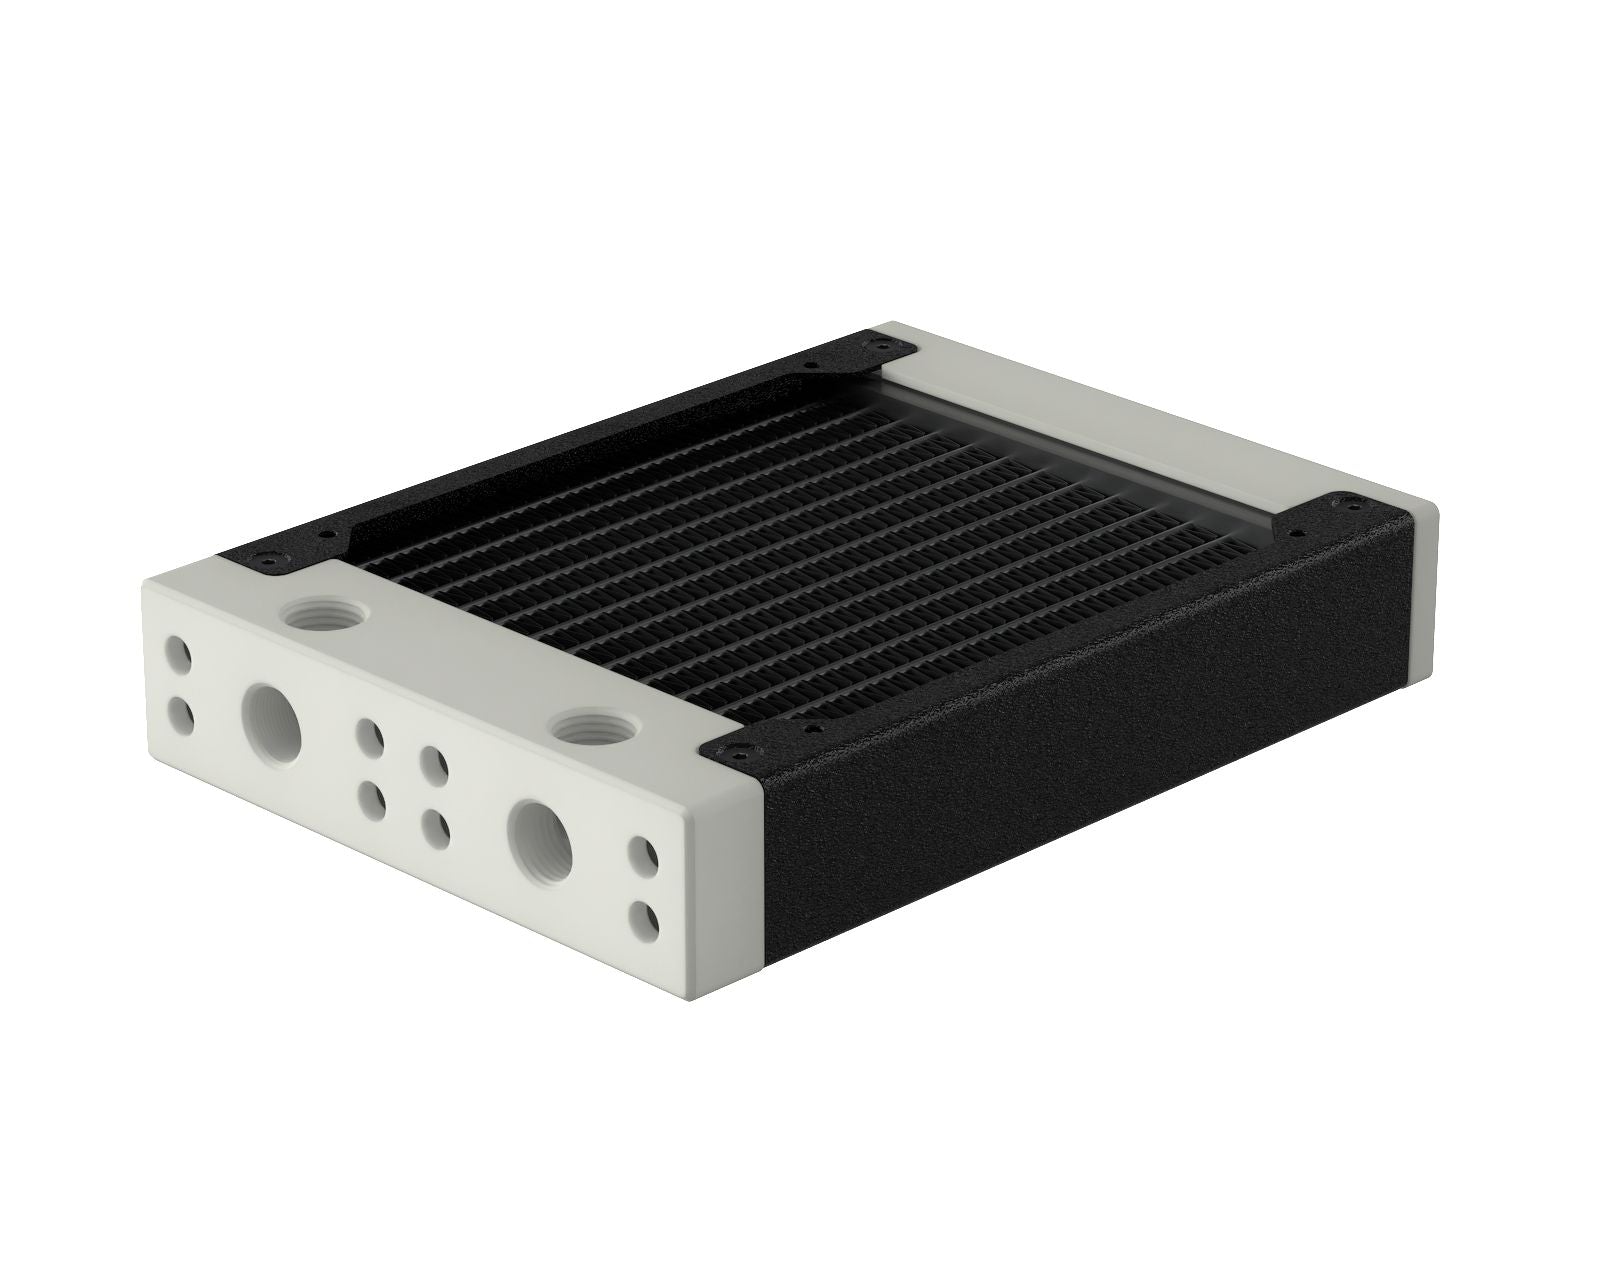 PrimoChill 120SL (30mm) EXIMO Modular Radiator, White POM, 1x120mm, Single Fan (R-SL-W12) Available in 20+ Colors, Assembled in USA and Custom Watercooling Loop Ready - TX Matte Black